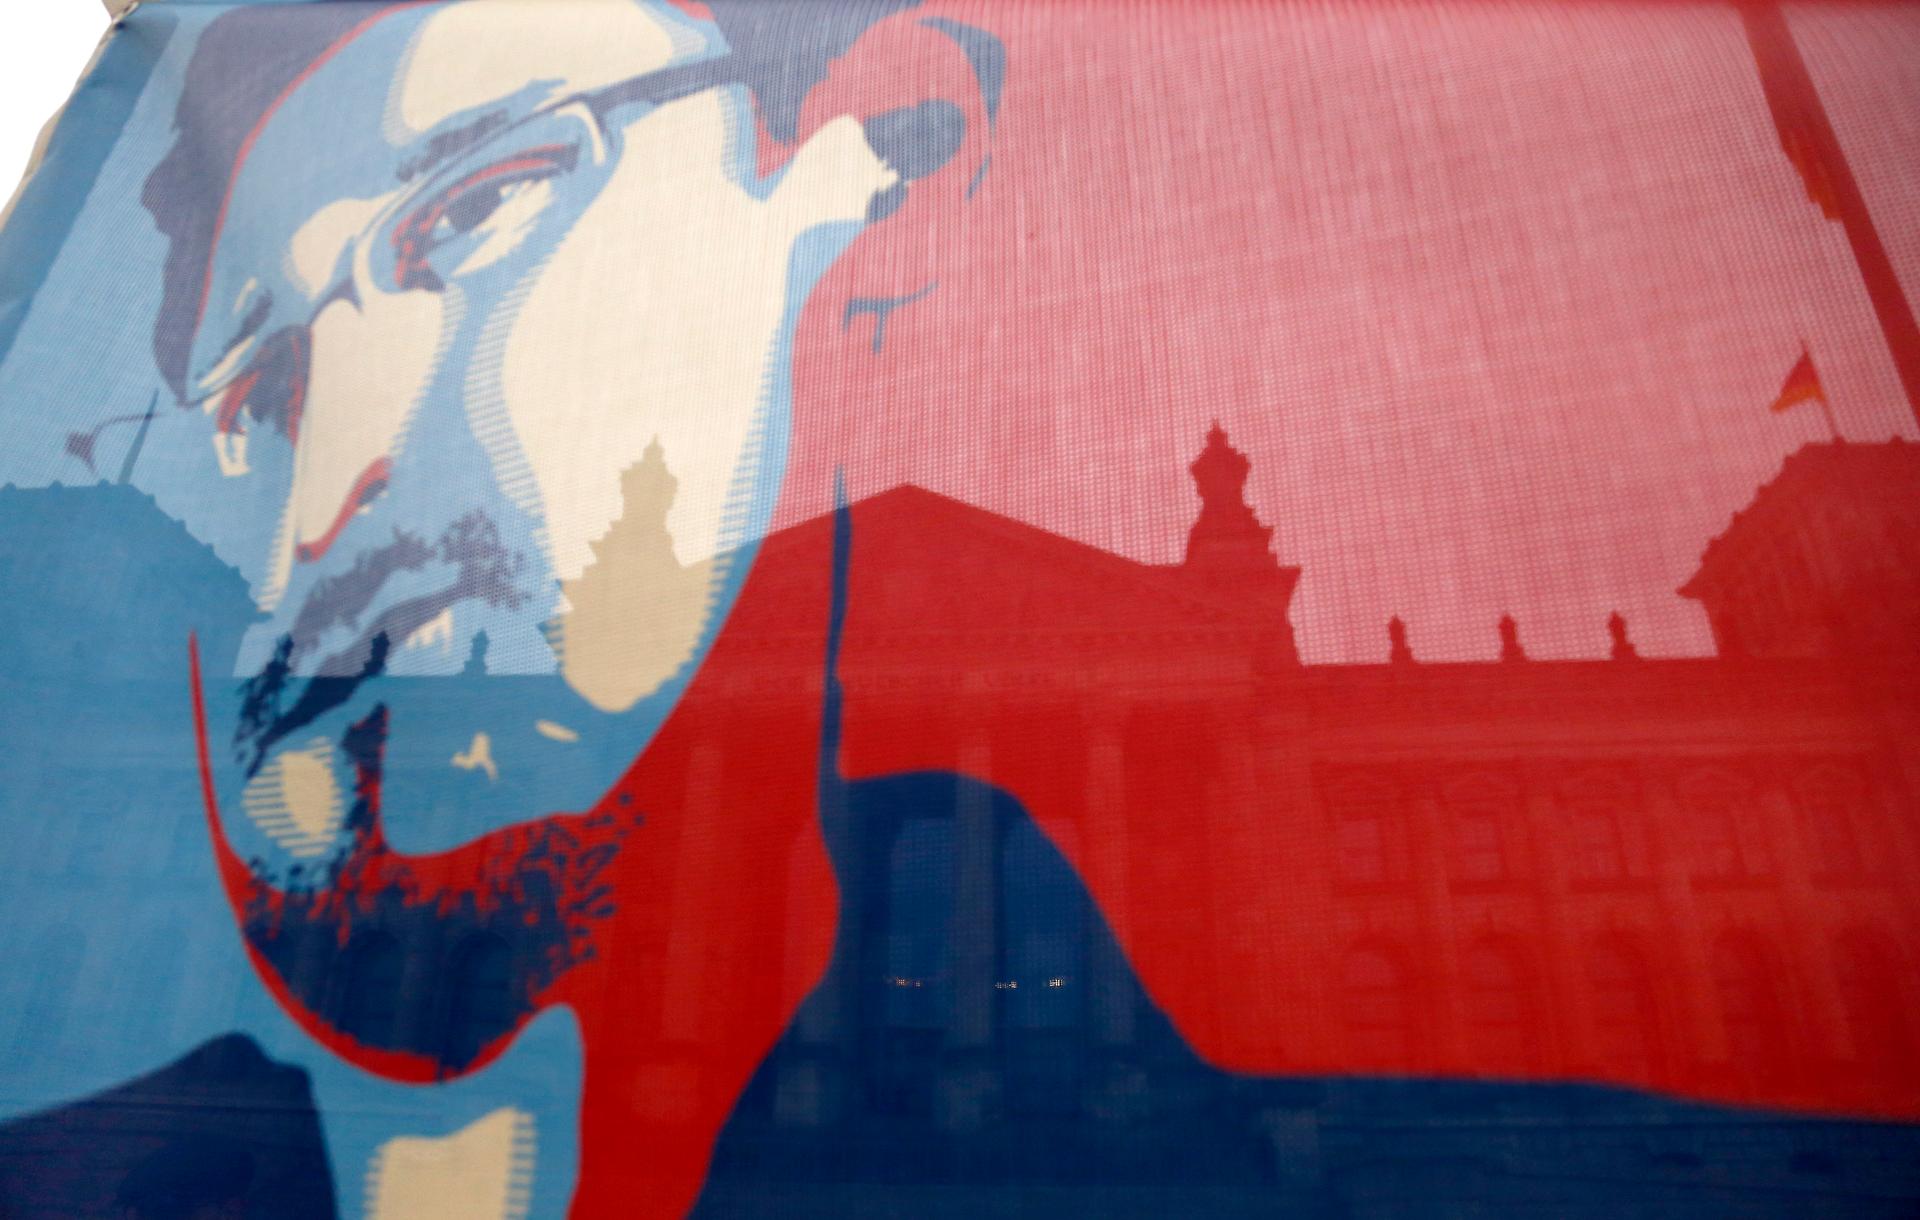 Germany's Reichstag building pictured though a flag depicting former NSA contractor Edward Snowden.